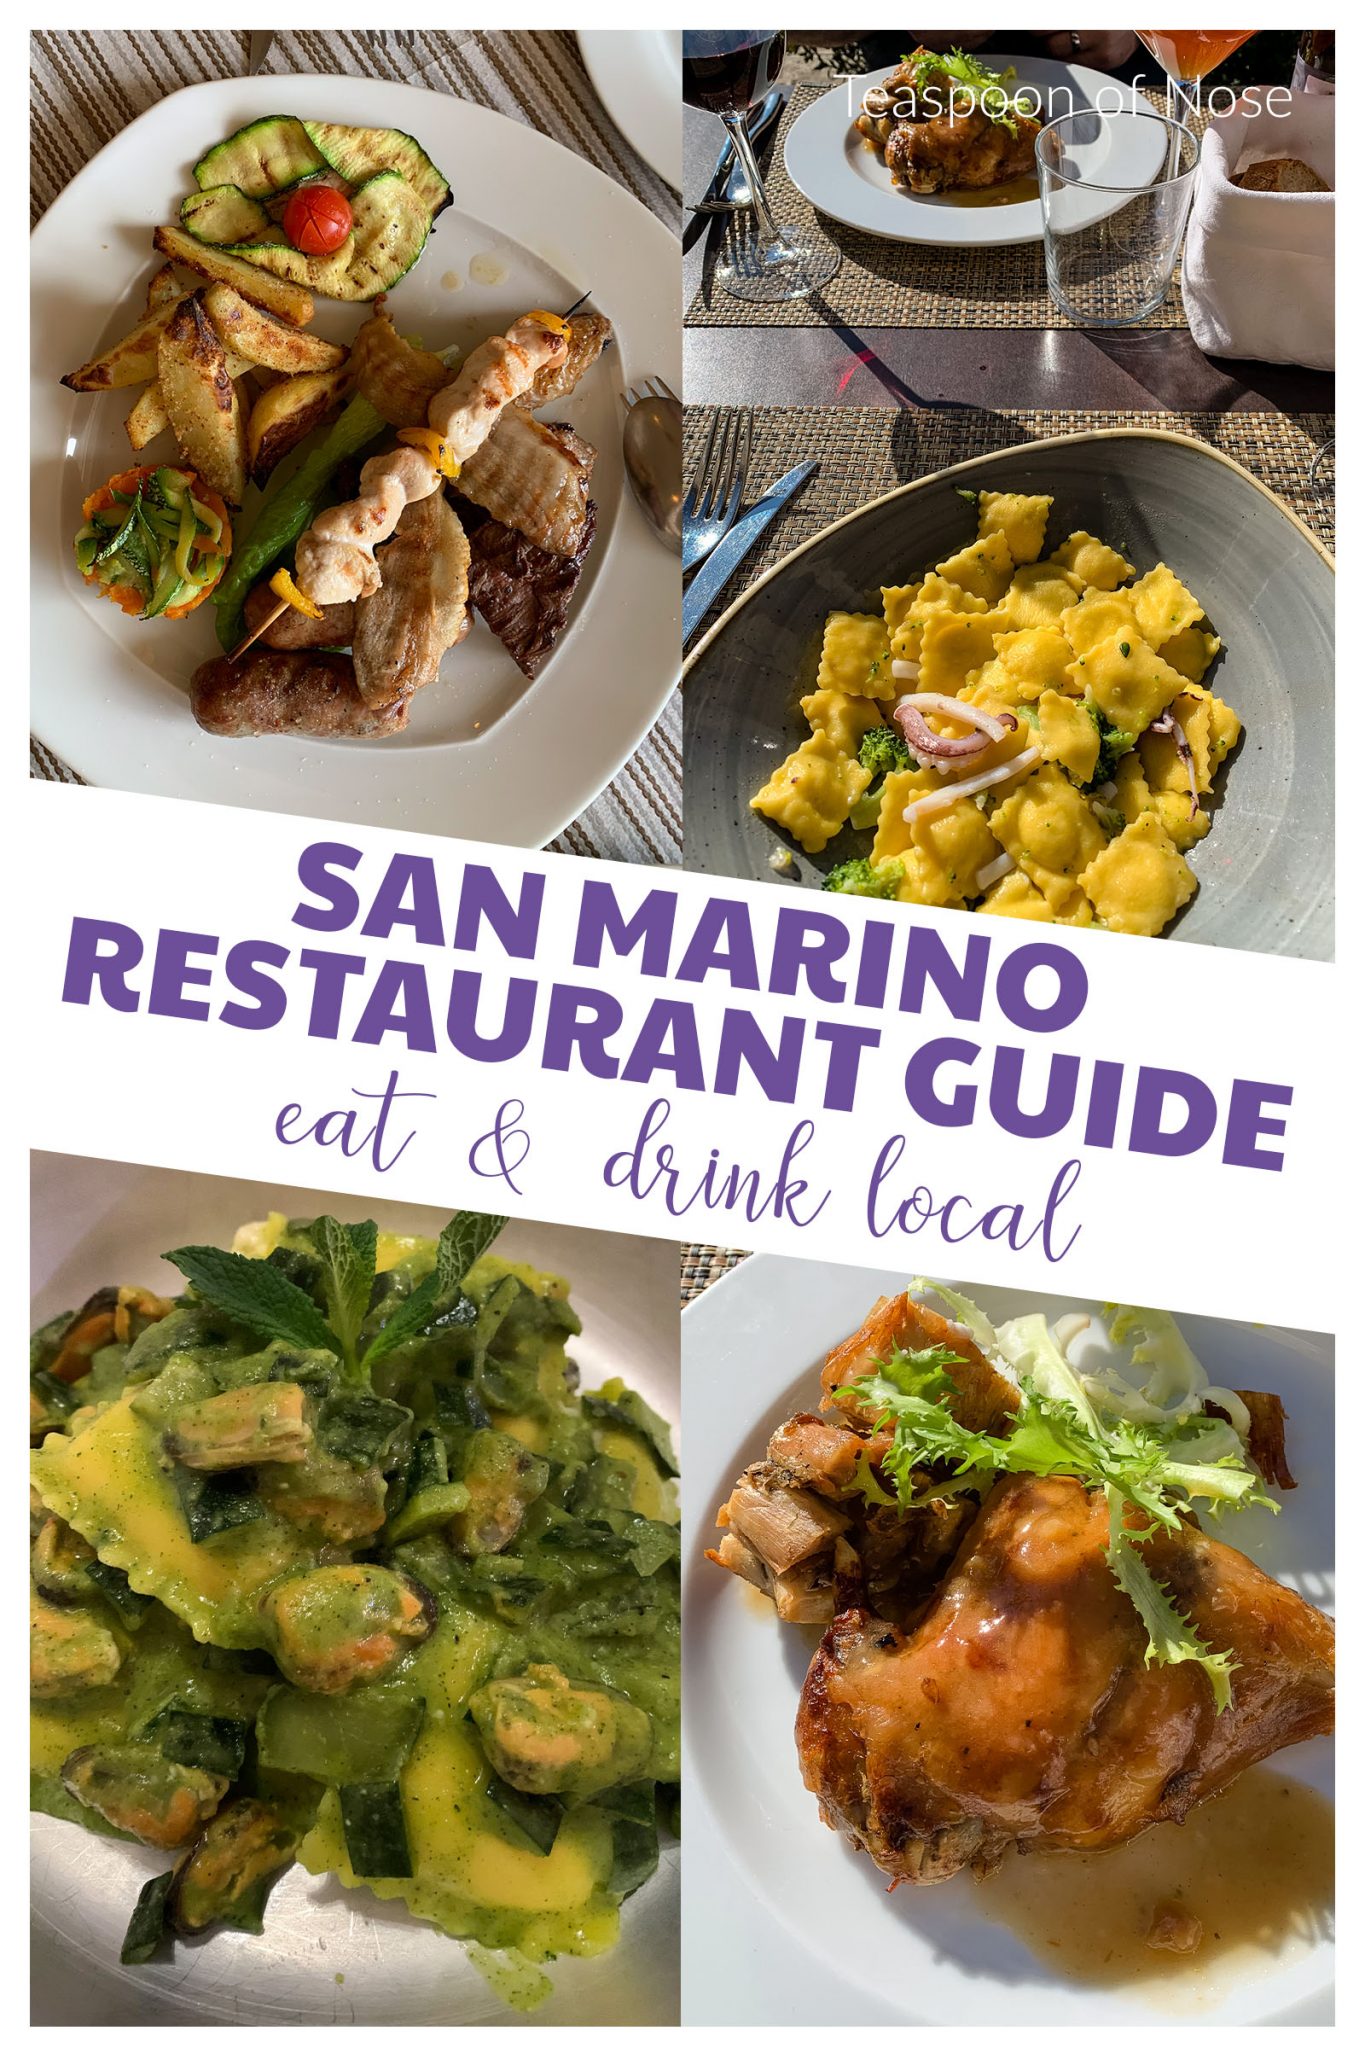 Where to Stay and Eat in San Marino - Teaspoon of Nose